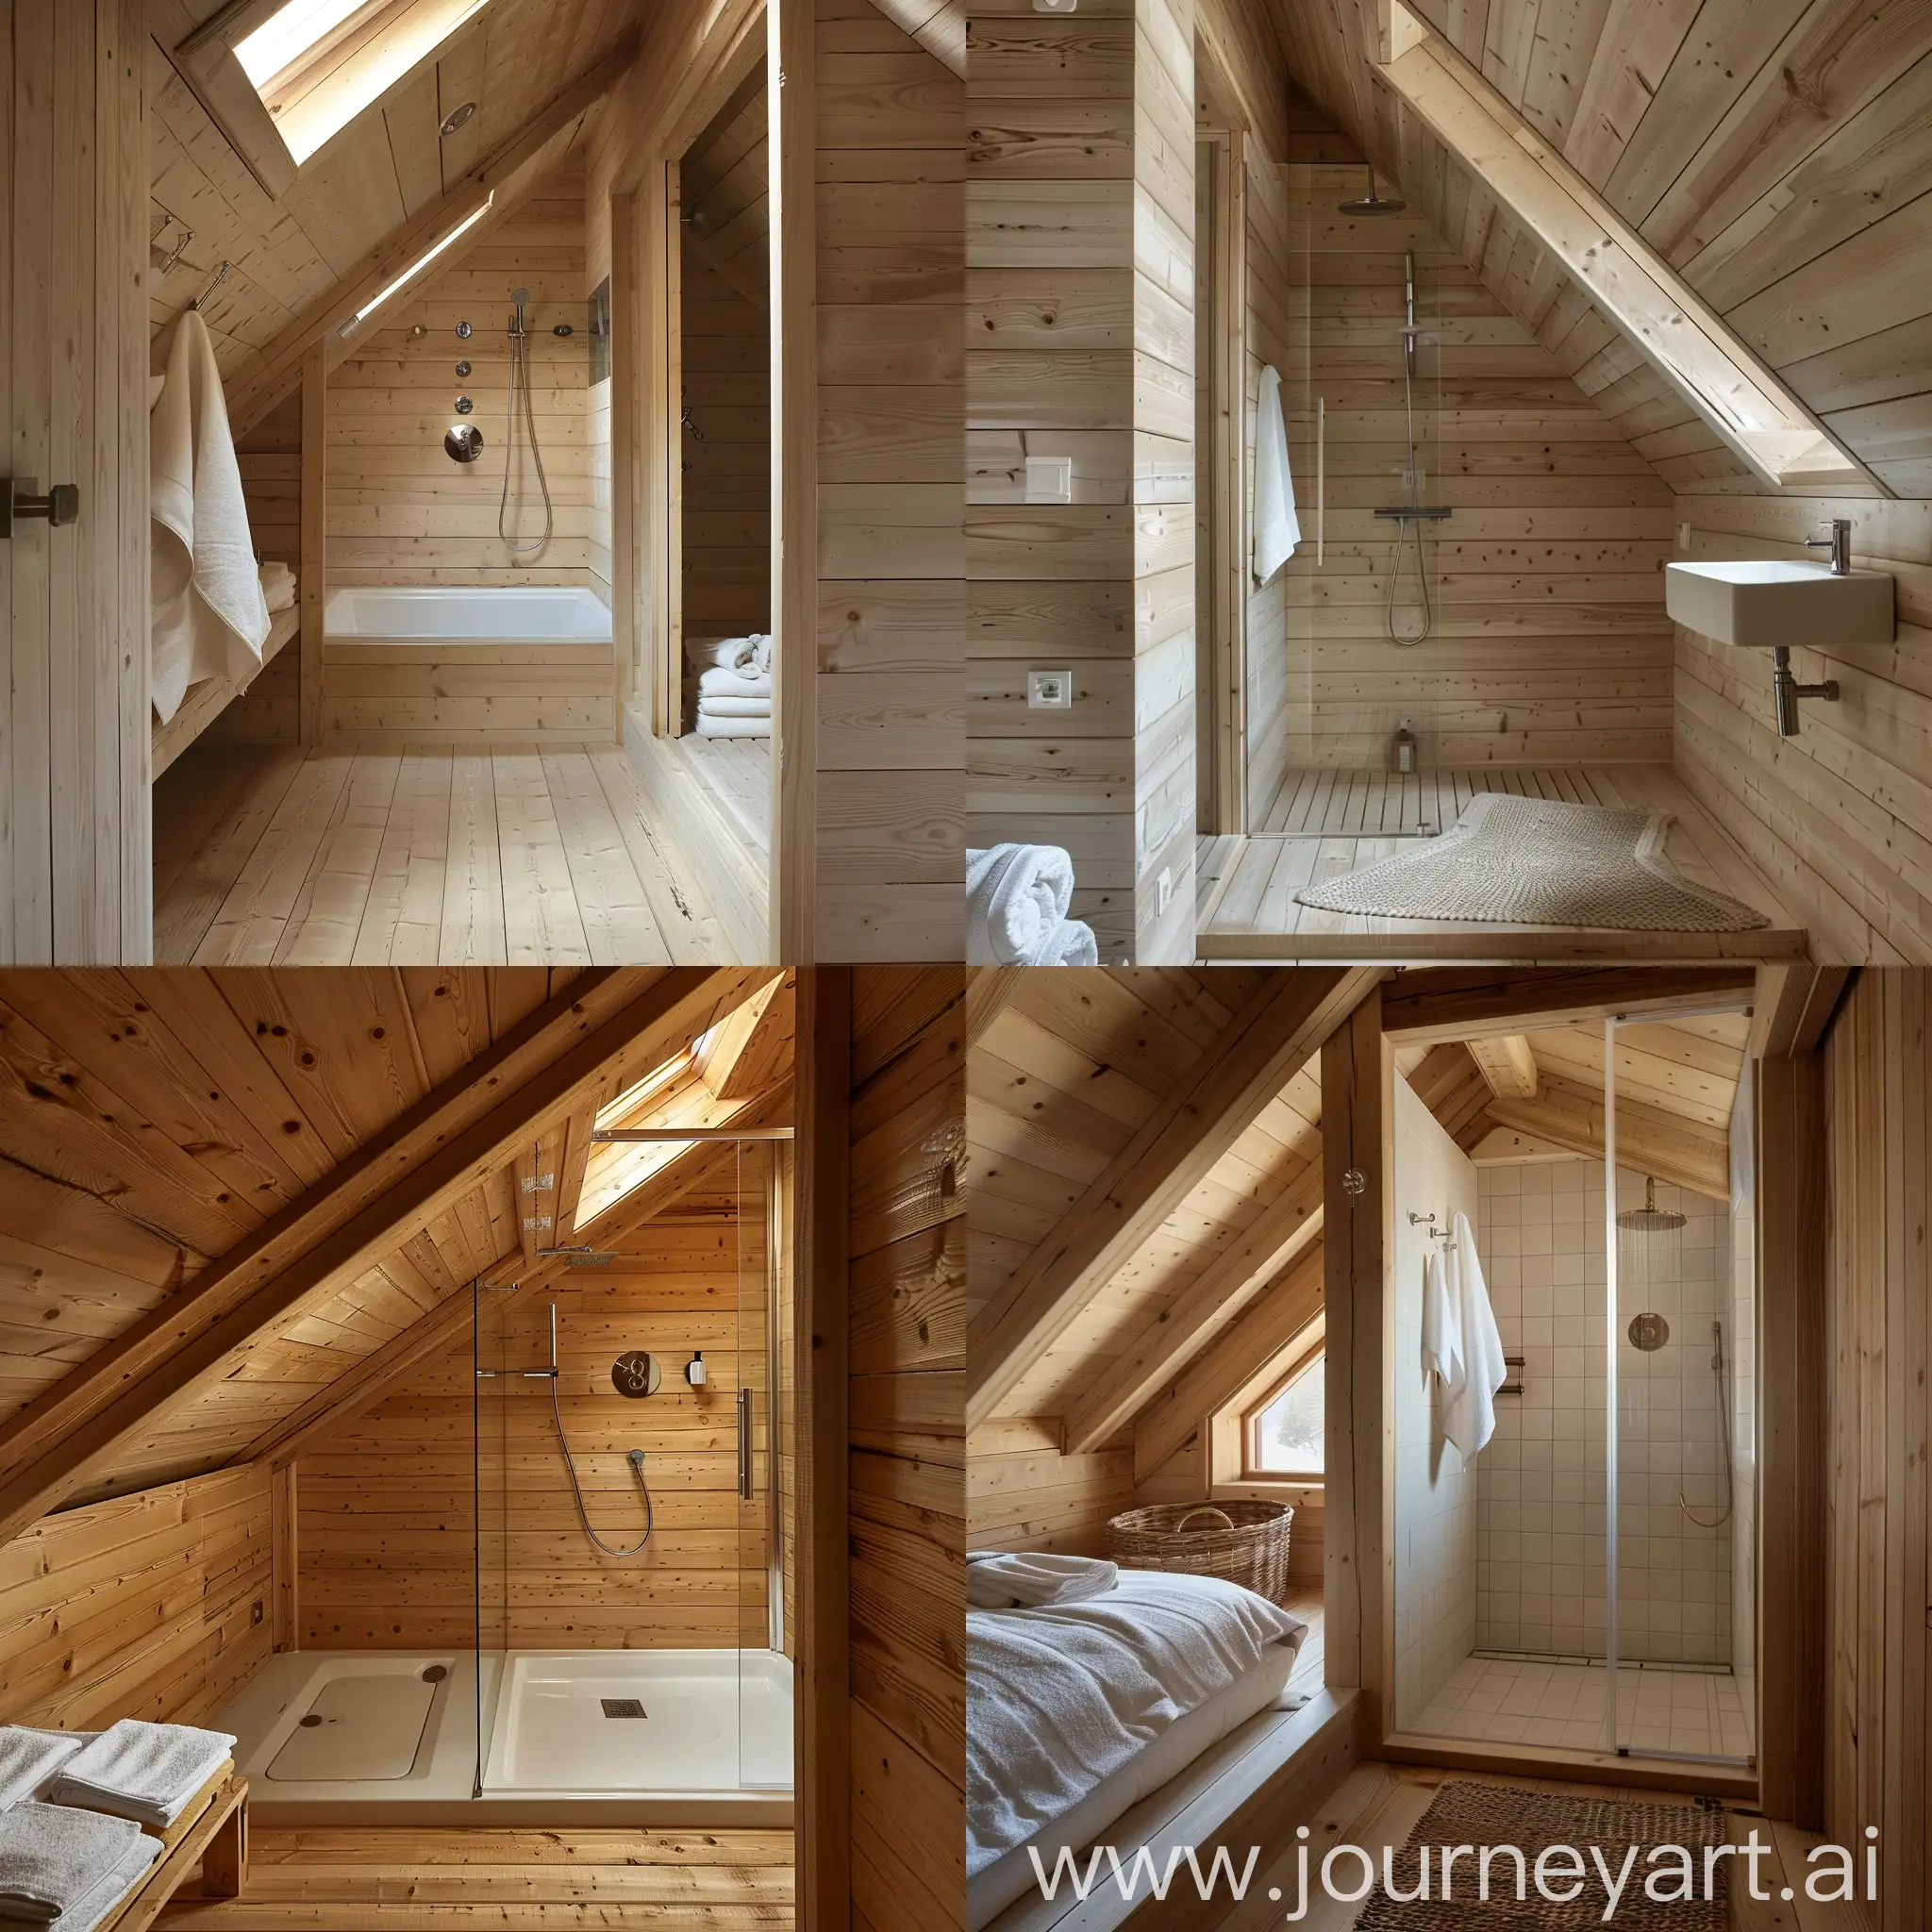 Rustic-Chalet-Attic-Shower-Room-in-Wooden-House